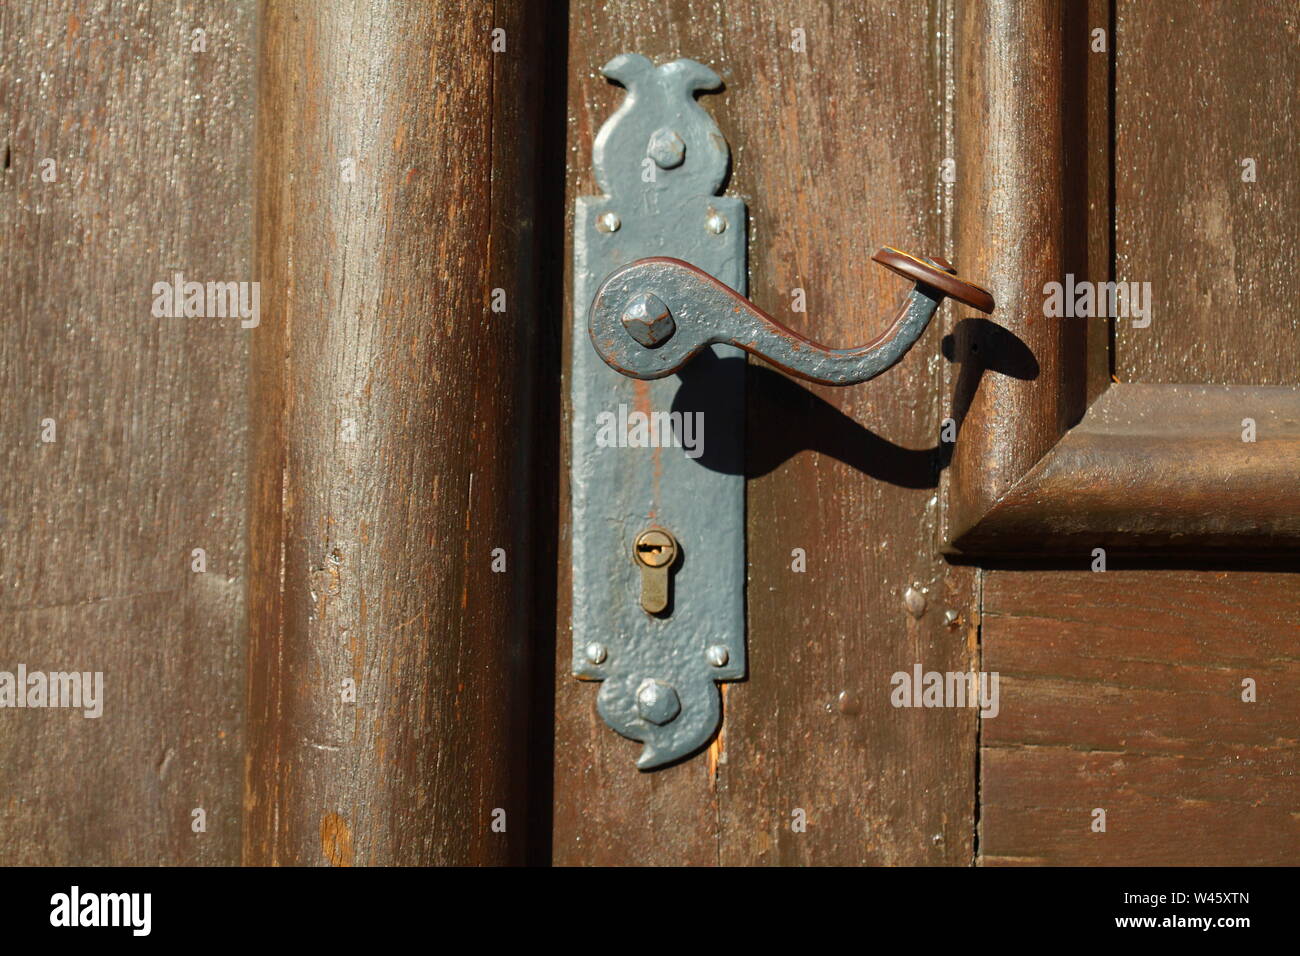 Turklinke High Resolution Stock Photography and Images - Alamy